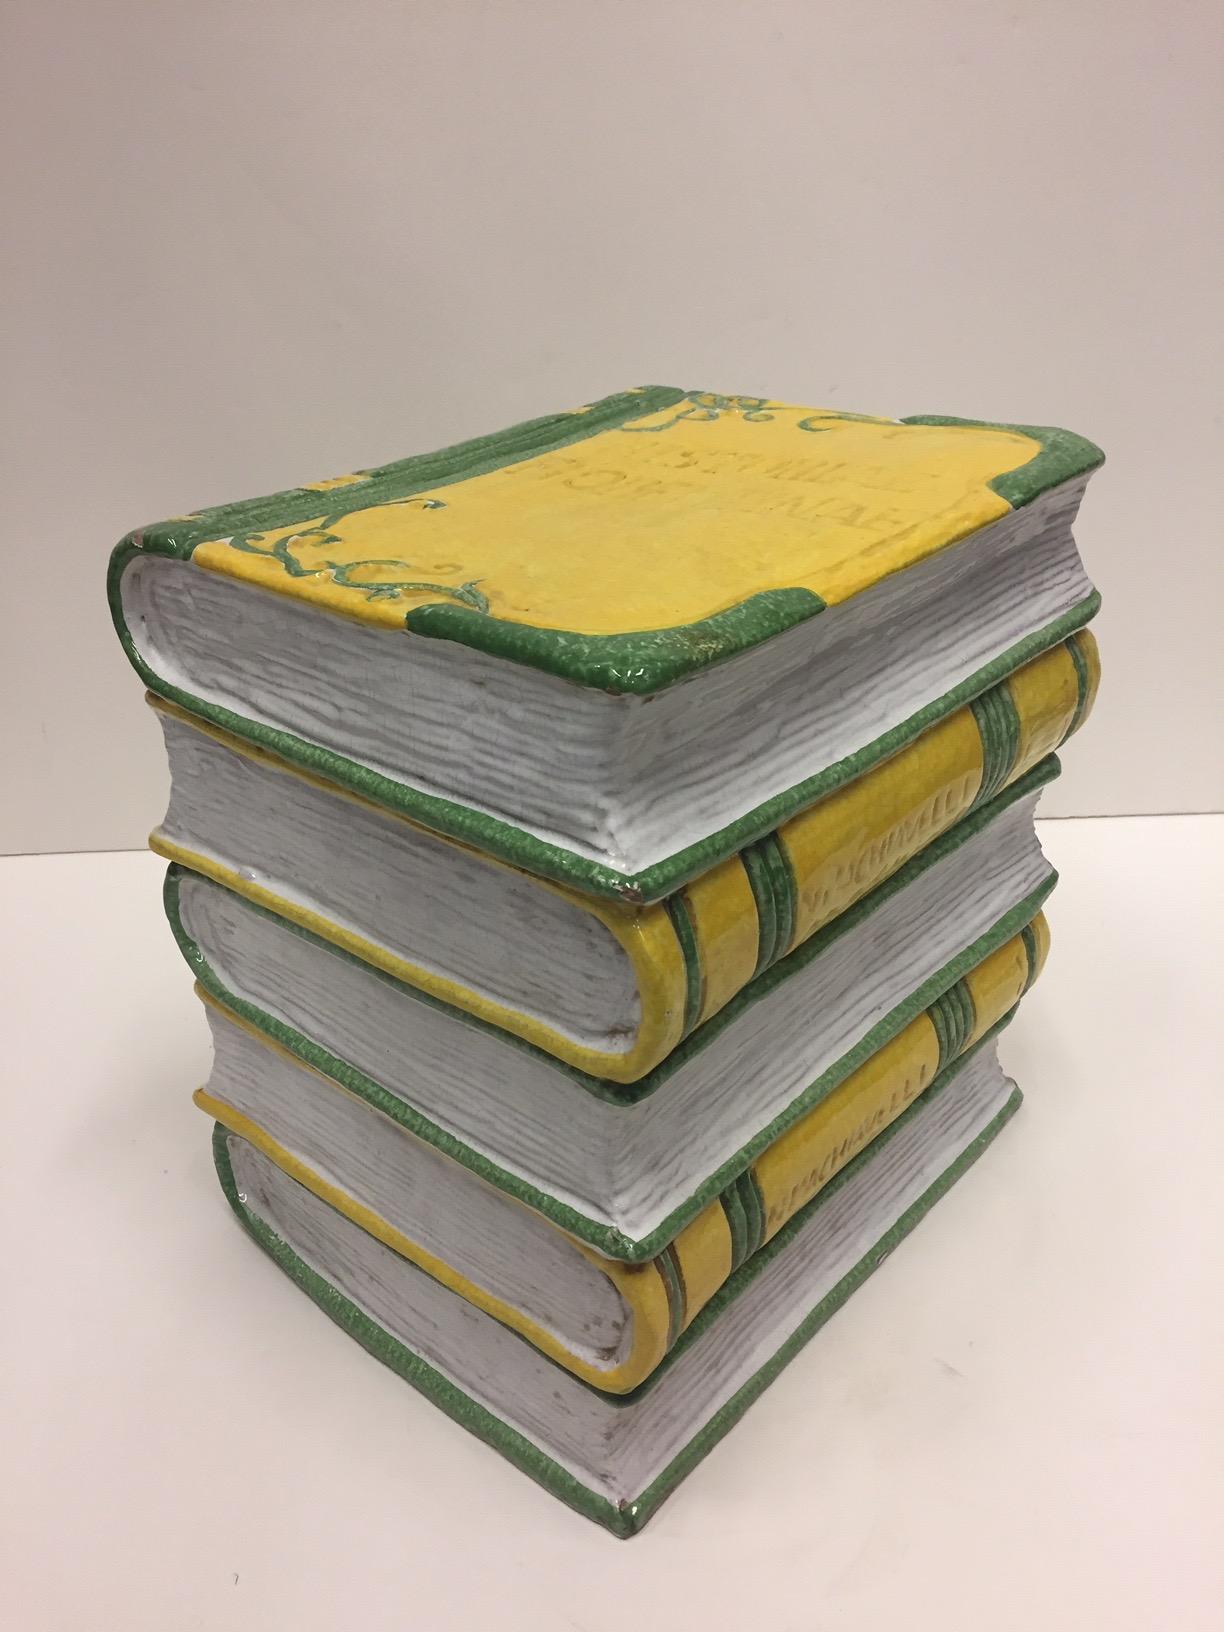 A beautiful and unusual glazed terracotta garden seat in the form of a stack of books. Colors are a snappy white, yellow and green and the embossed Italian writing on top is a wonderful element. Great as a stylish drinks table.